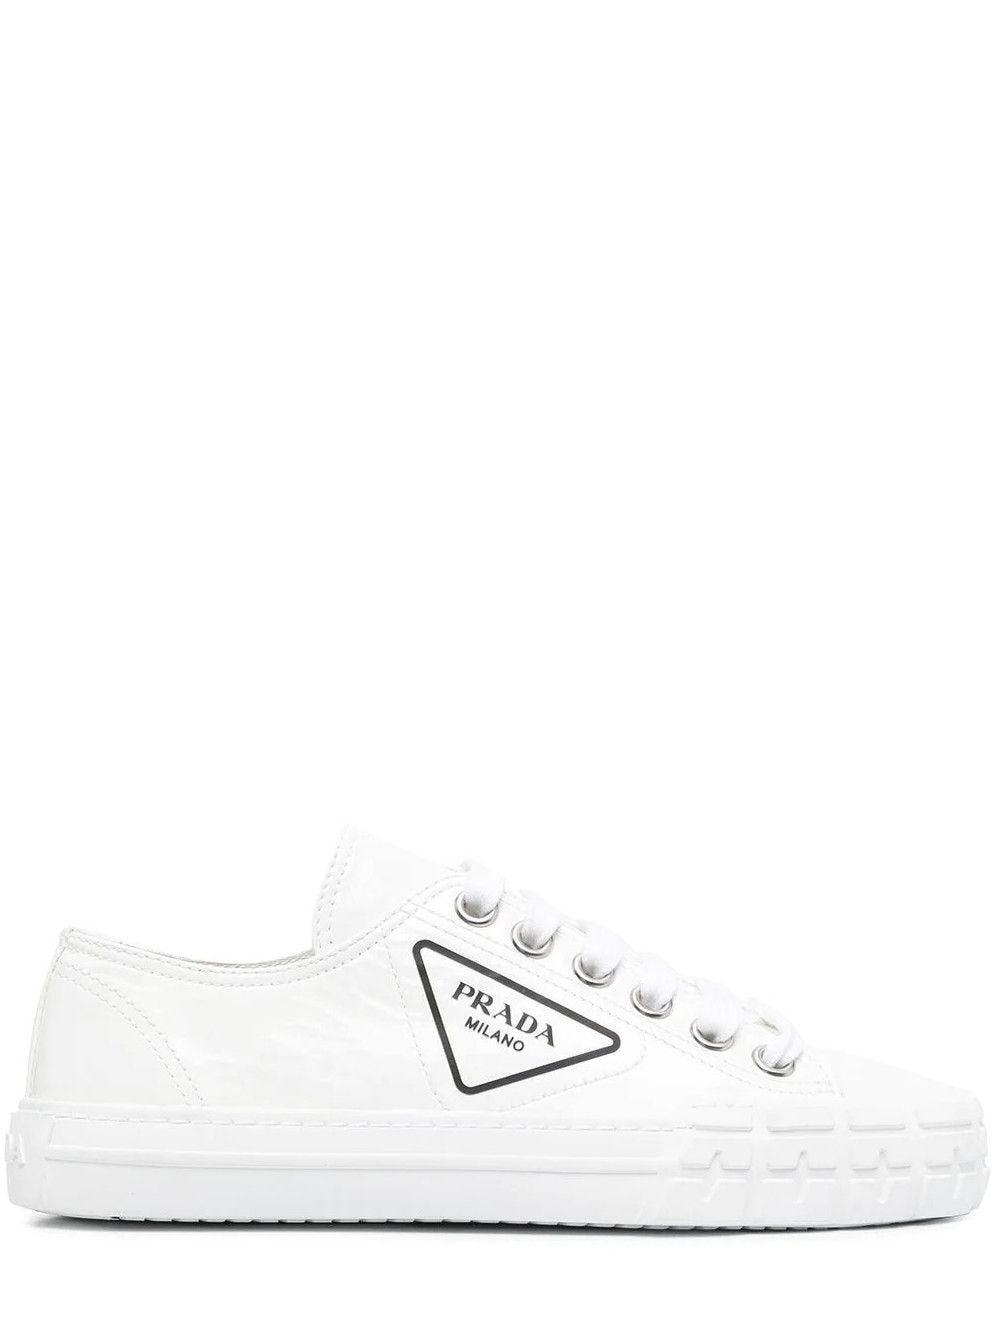 Insecten tellen gastvrouw Keizer Prada White Wheel Patent Leather Sneakers With Vulcanized Rubber Sole | Lyst